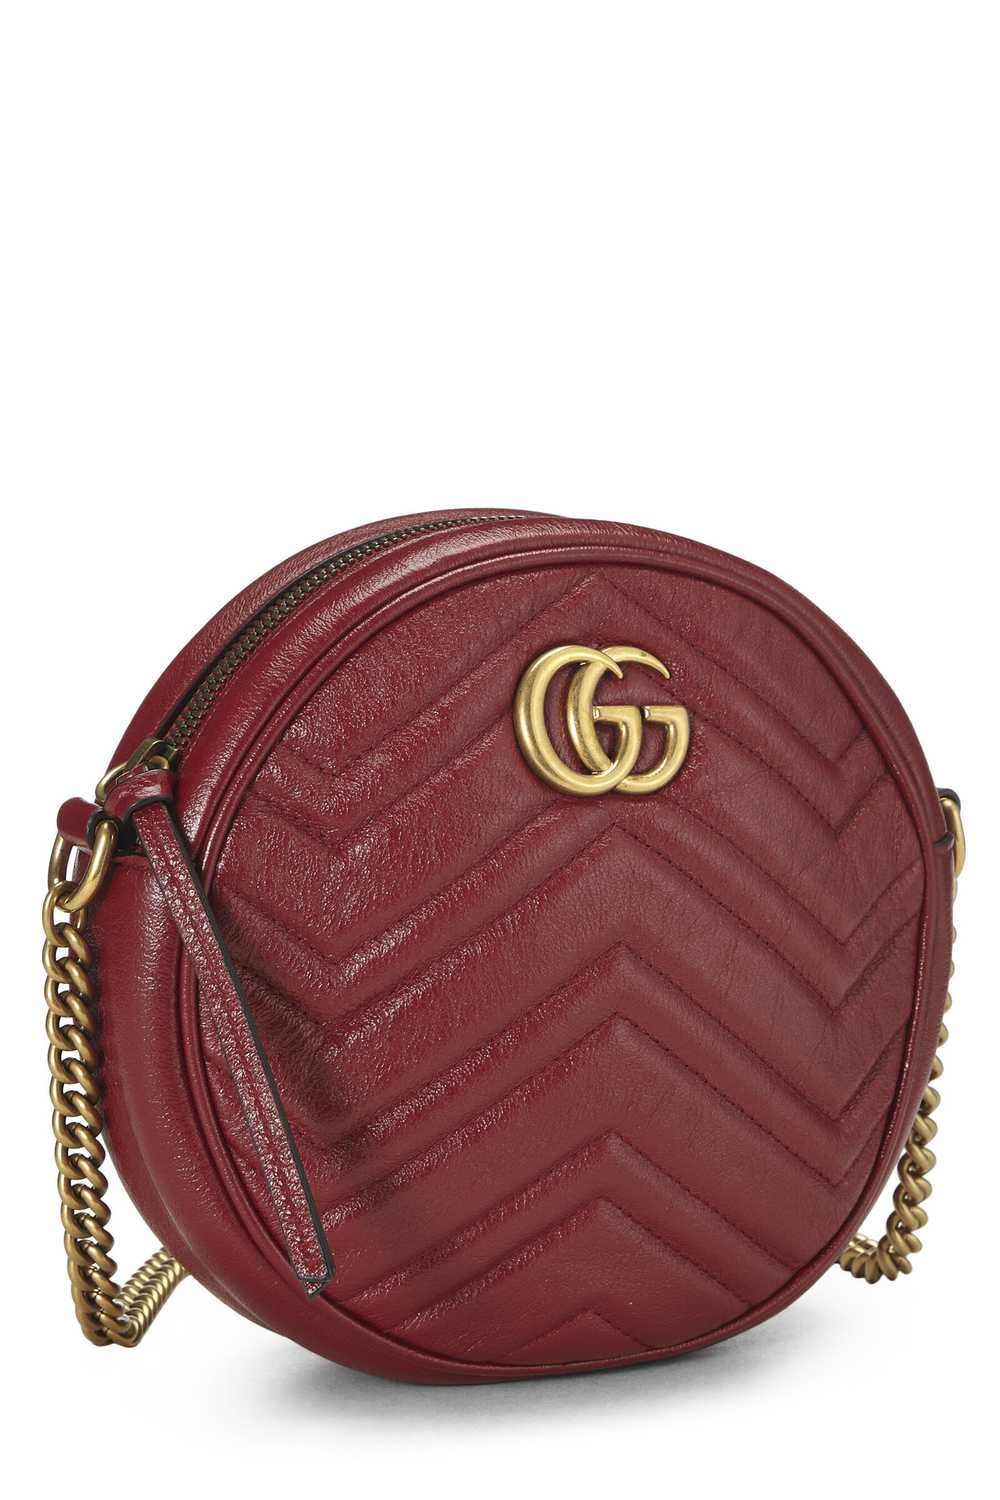 Red Leather GG Marmont Round Shoulder Bag Mini - image 2